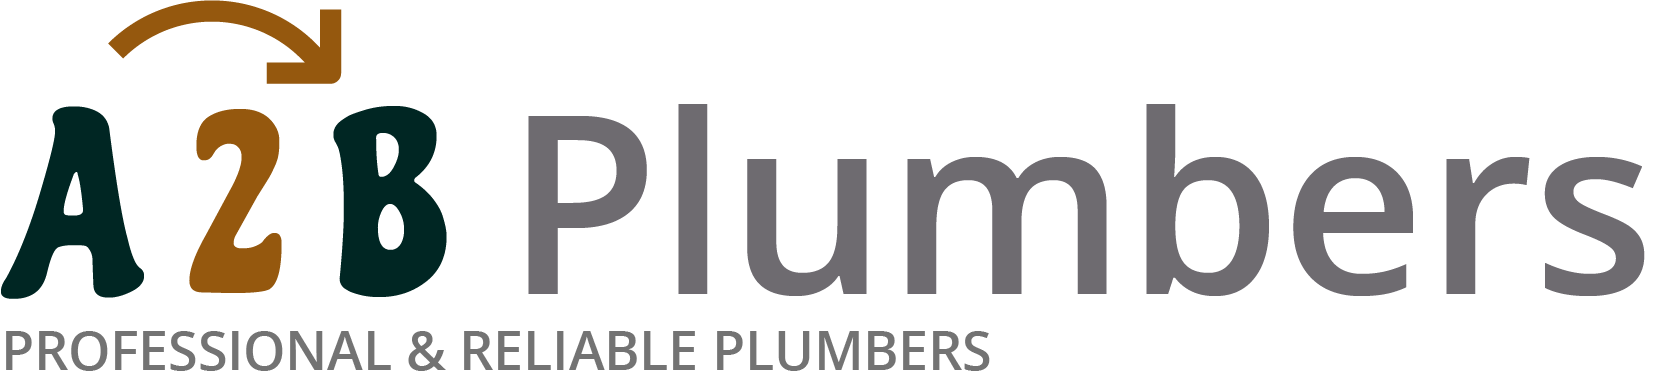 If you need a boiler installed, a radiator repaired or a leaking tap fixed, call us now - we provide services for properties in Rubery and the local area.